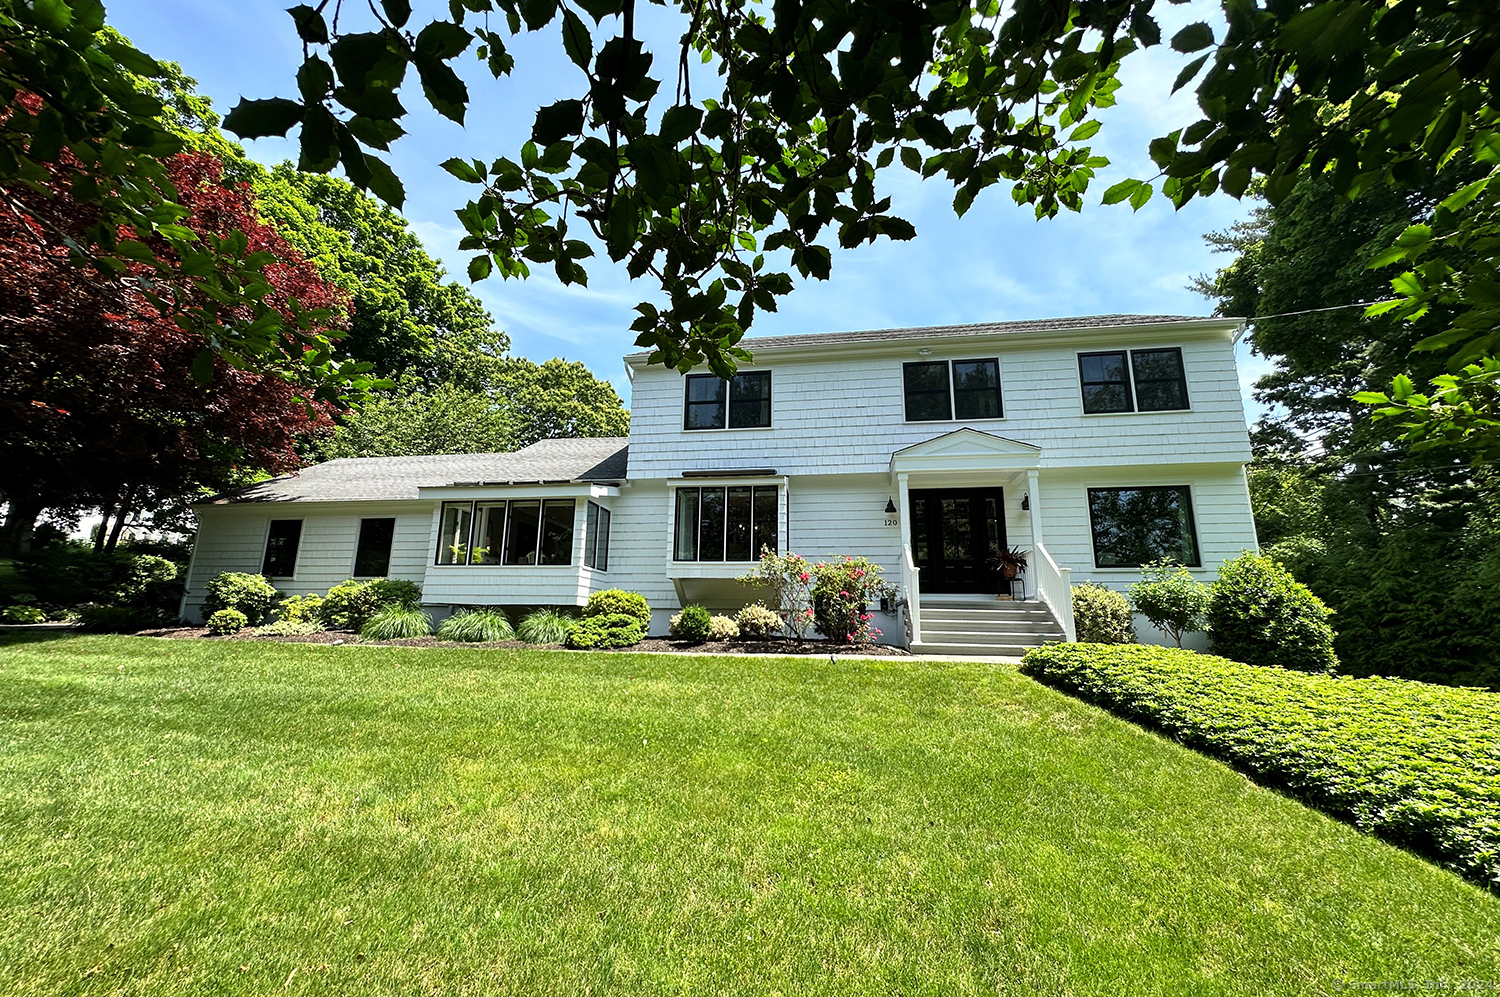 This beautiful colonial is located in one of the most peaceful and private settings in the neighborhood.  Situated on a cul de sac, this home has all the updates imaginable. Open floor plan allows for easy living, with a large living room, family room, spacious dining area, plus EIK in open plan kitchen with serving bar.  The kitchen has new shaker cabinets, quartz counter tops and farm sink. The main level has two sets of french doors, wood burning fireplace and hardwood floors throughout.  Primary bedroom has walkin closet and updated full bath. Updated full bath for additional bedrooms located on upper level. Lots of natural light streaming in all day. New Anderson windows and fresh exterior paint make this home move in ready. Additional cottage and jacuzzi tub add to the outdoor space, with new trex decking and large stone patio. This is your very own retreat. Home theater and additional play room on the lower level, which also has plenty of storage and a direct walk-out. This home is also a Smart Home - lights, temperature and TV can be controlled from your iphone. There is nothing to be done but move in and make this home your own.